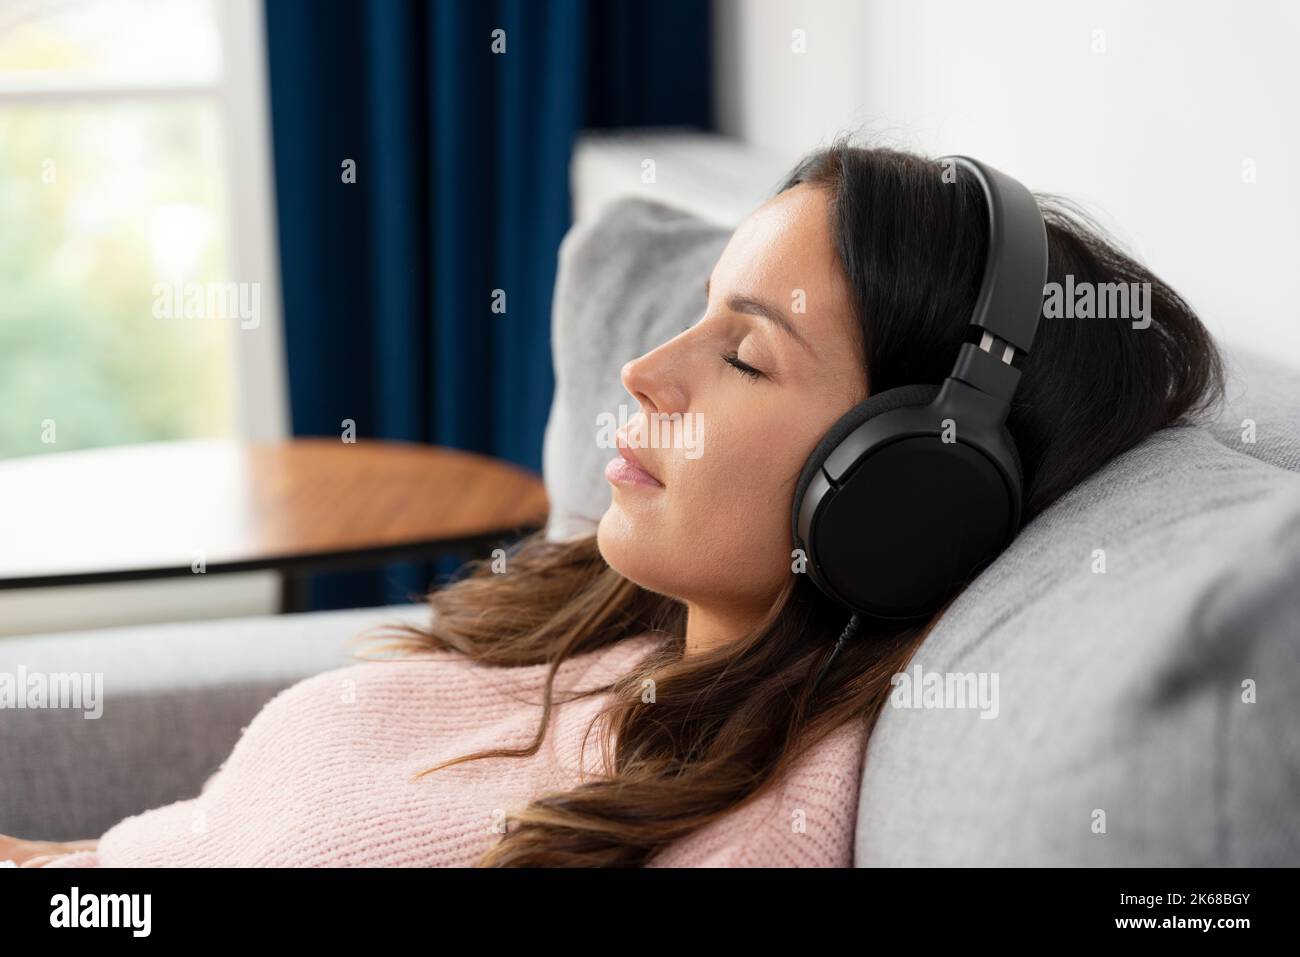 Woman listening music with headphones, relaxing at home Stock Photo